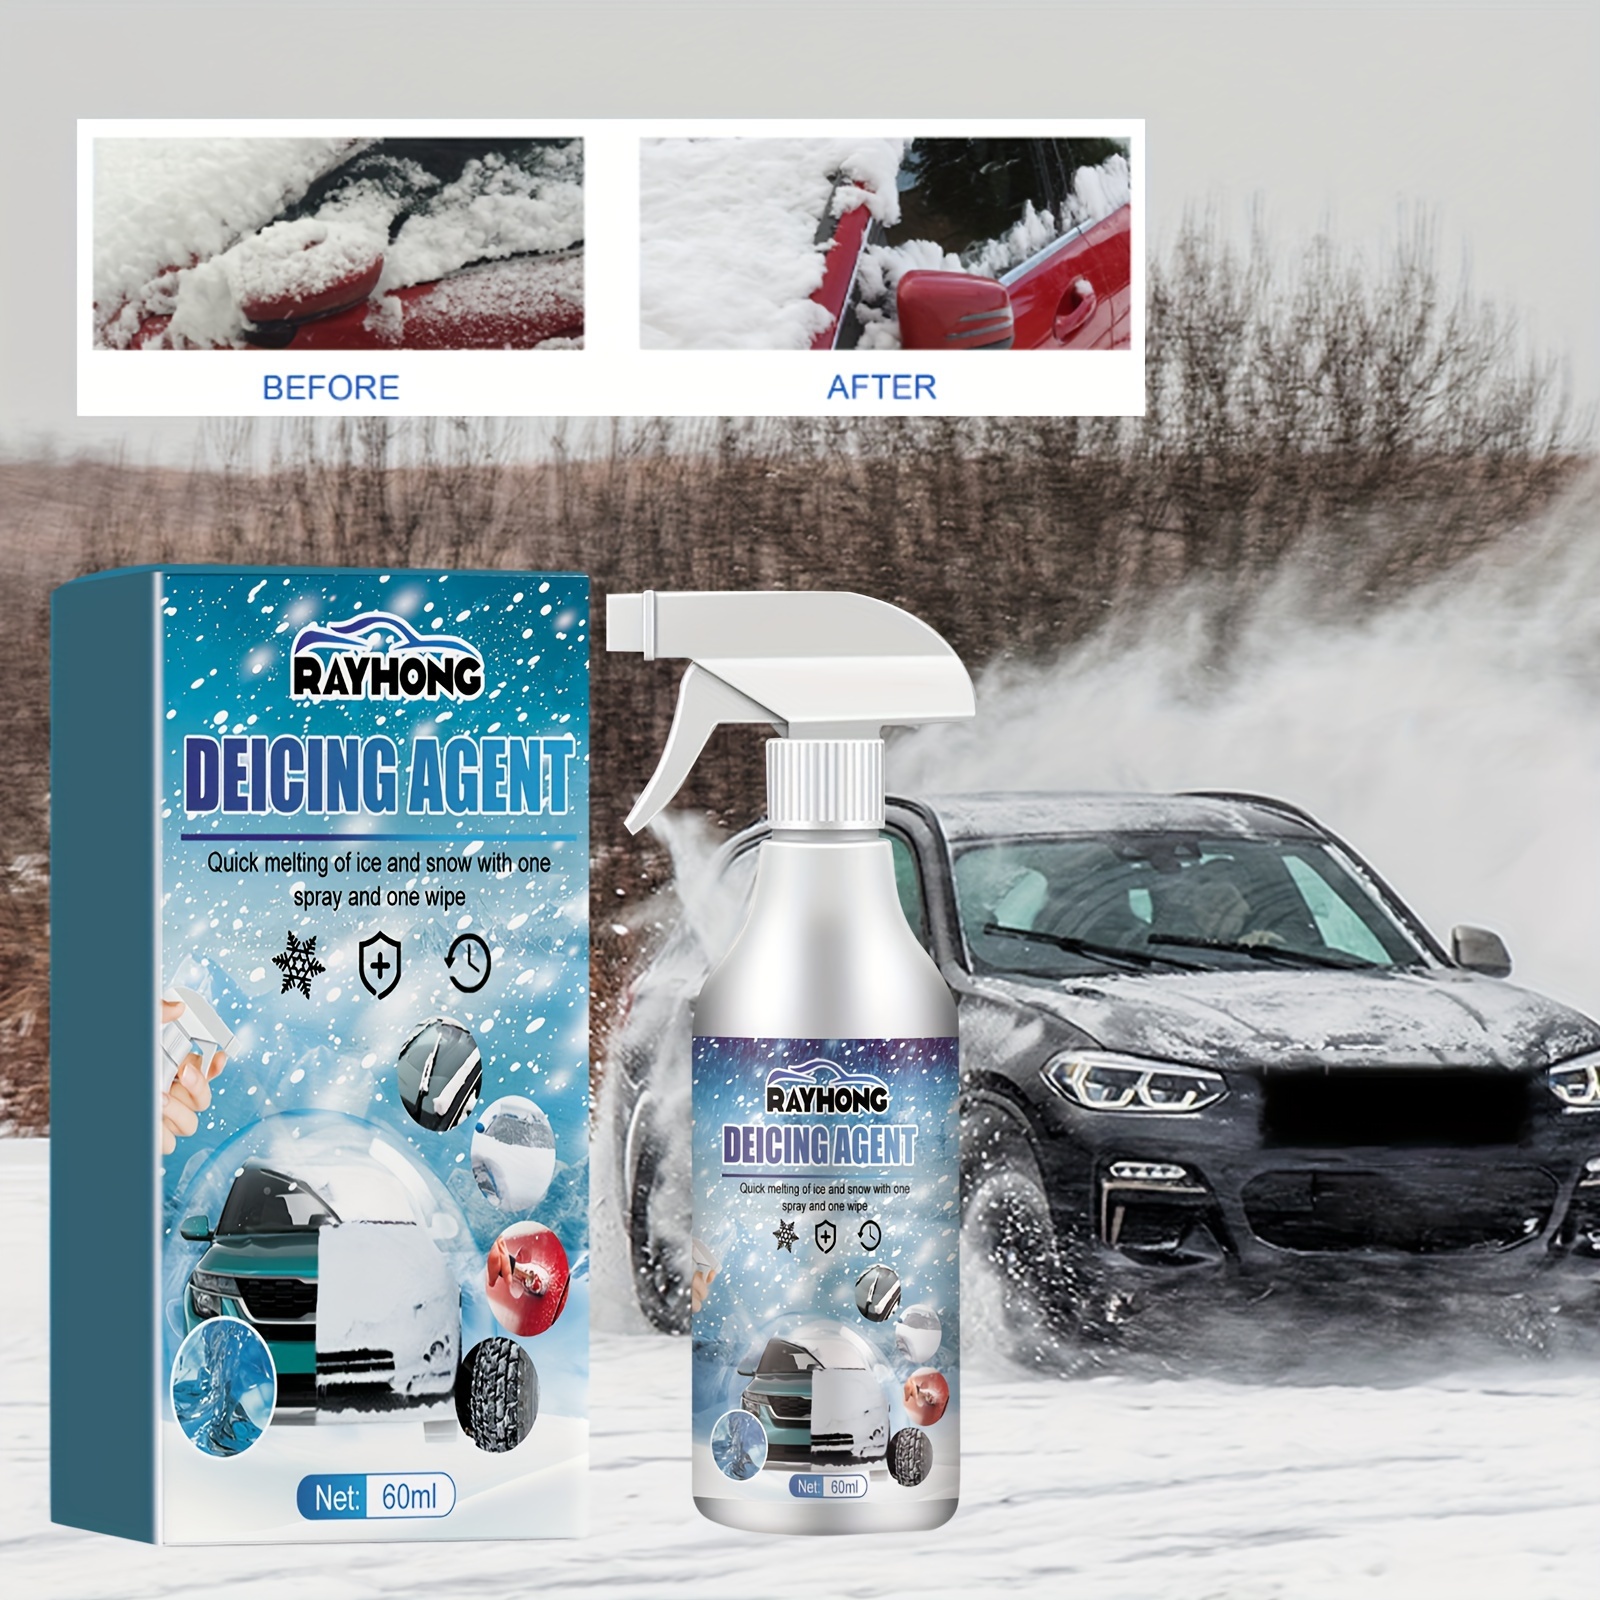 11 Oz Windshield Spray De Icer Instant Ice off Frost Remover Snow